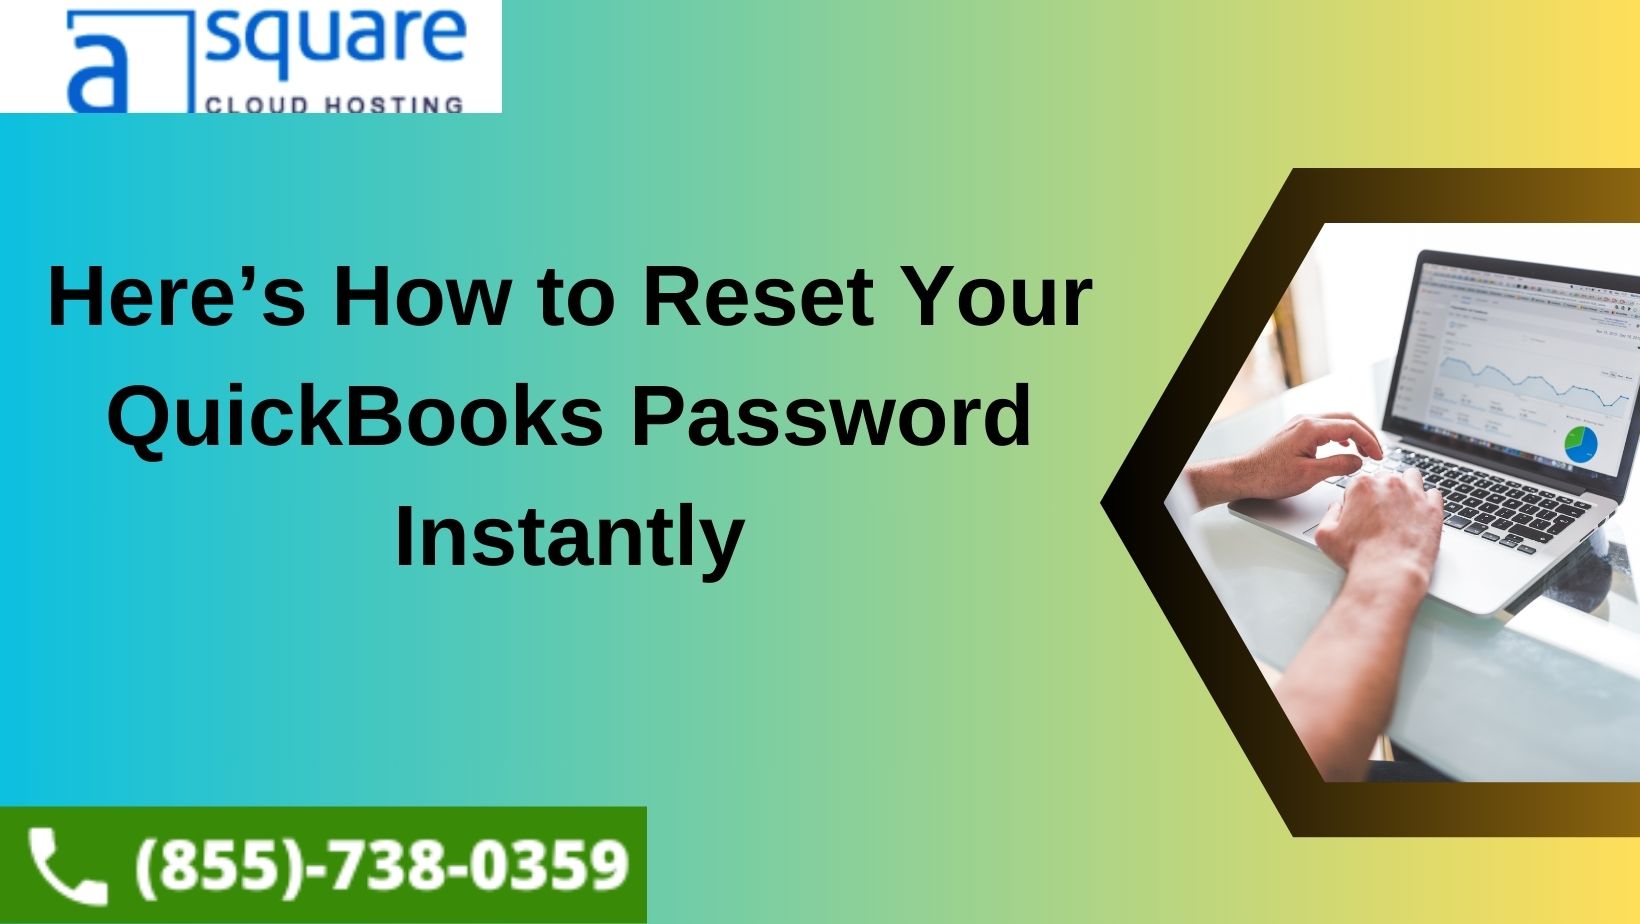 Here’s How to Reset Your QuickBooks Password Instantly